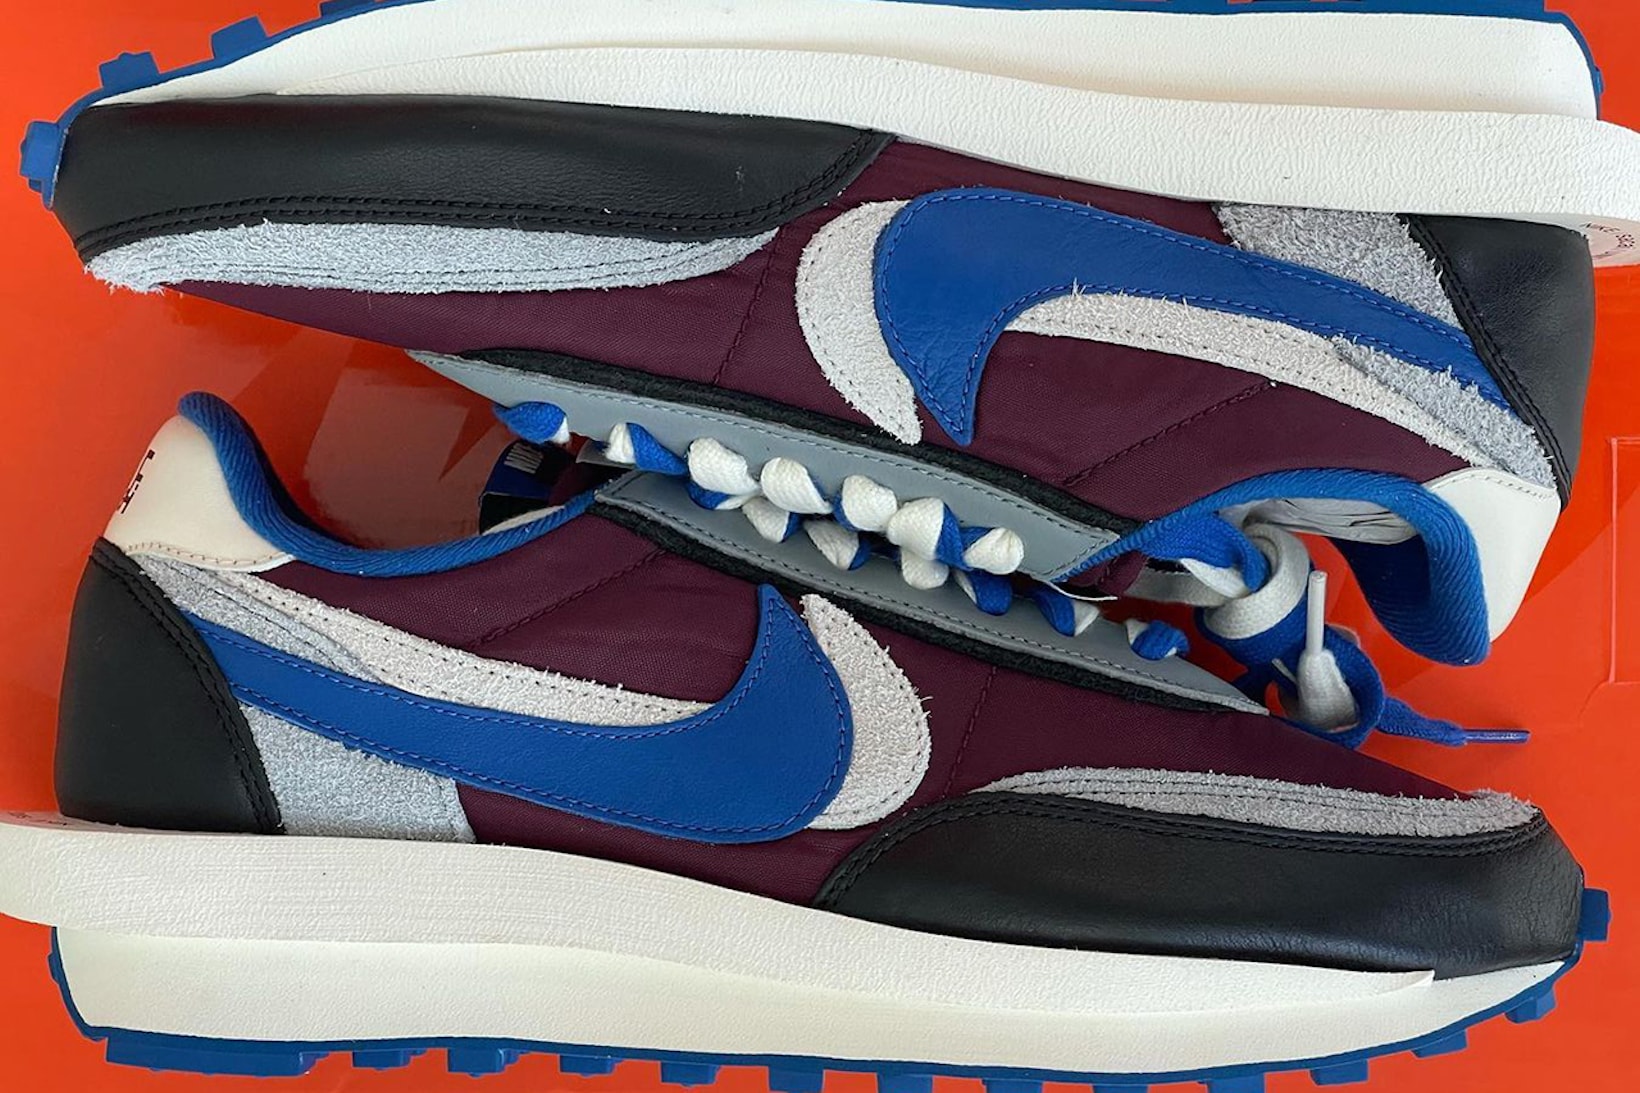 sacai UNDERCOVER Nike LDWaffle Collaboration Sneakers Footwear Shoes Night maroon blue black white